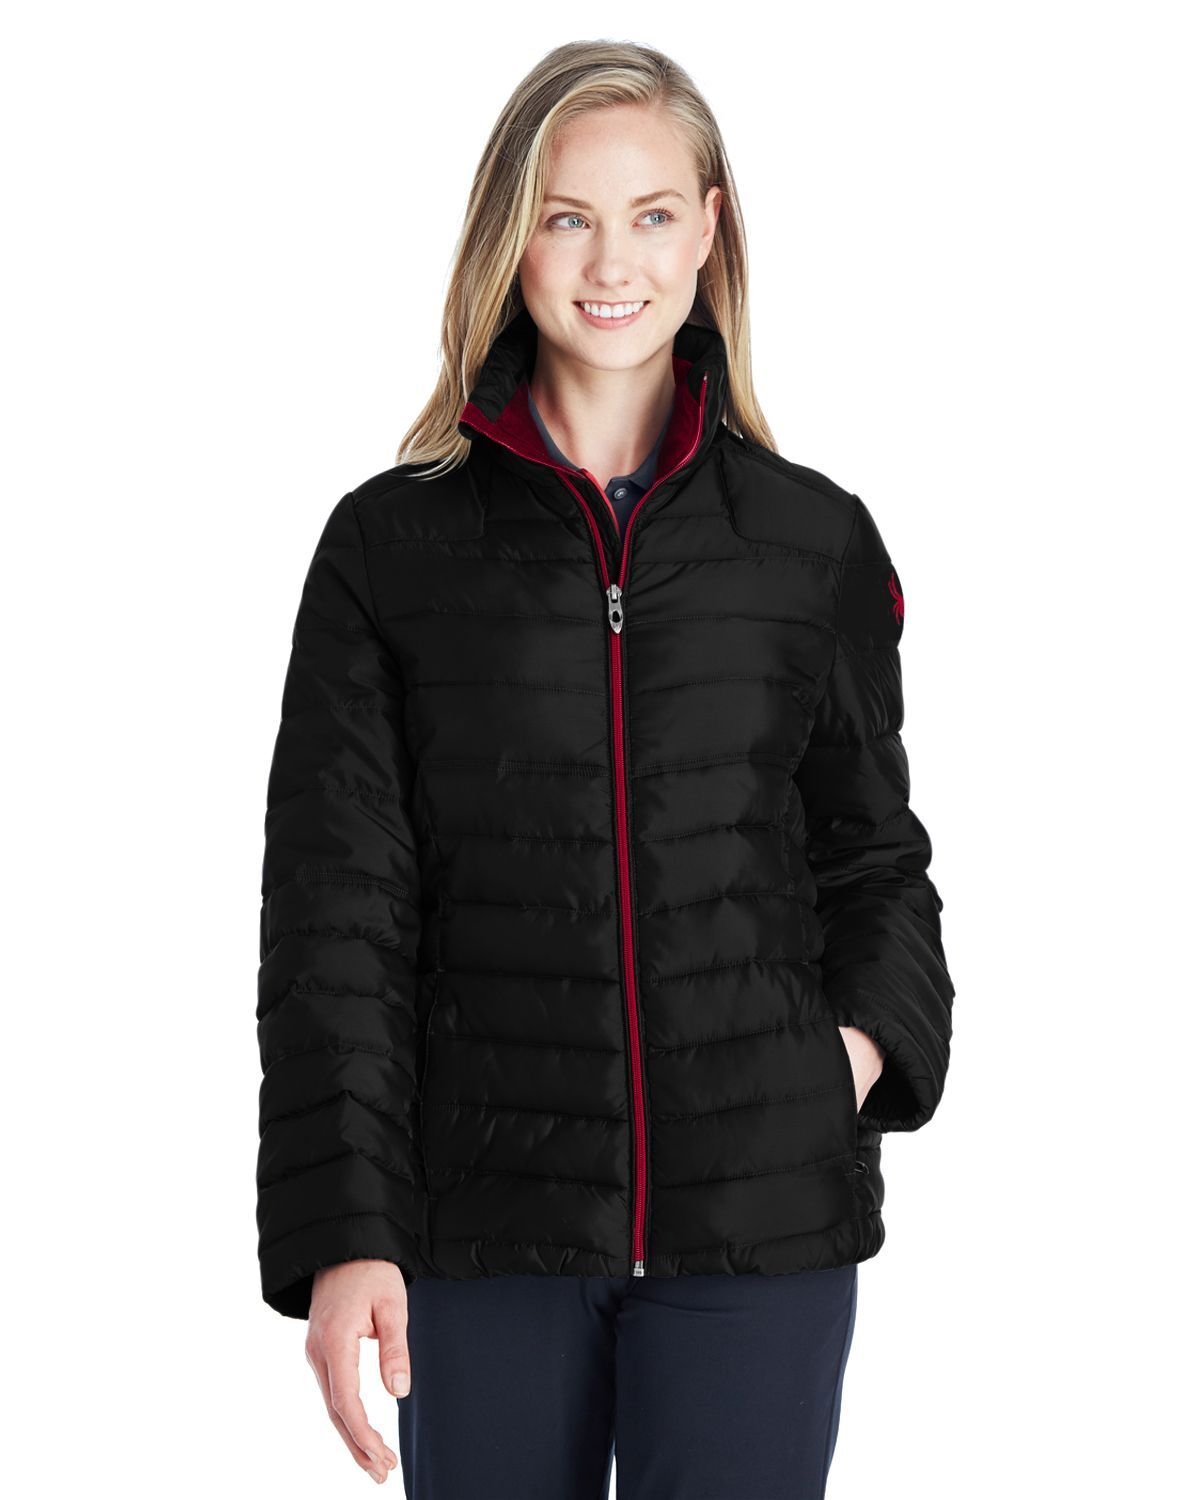 Spyder 187336 Ladies Supreme Insulated Puffer Jacket - A2ZClothing.com